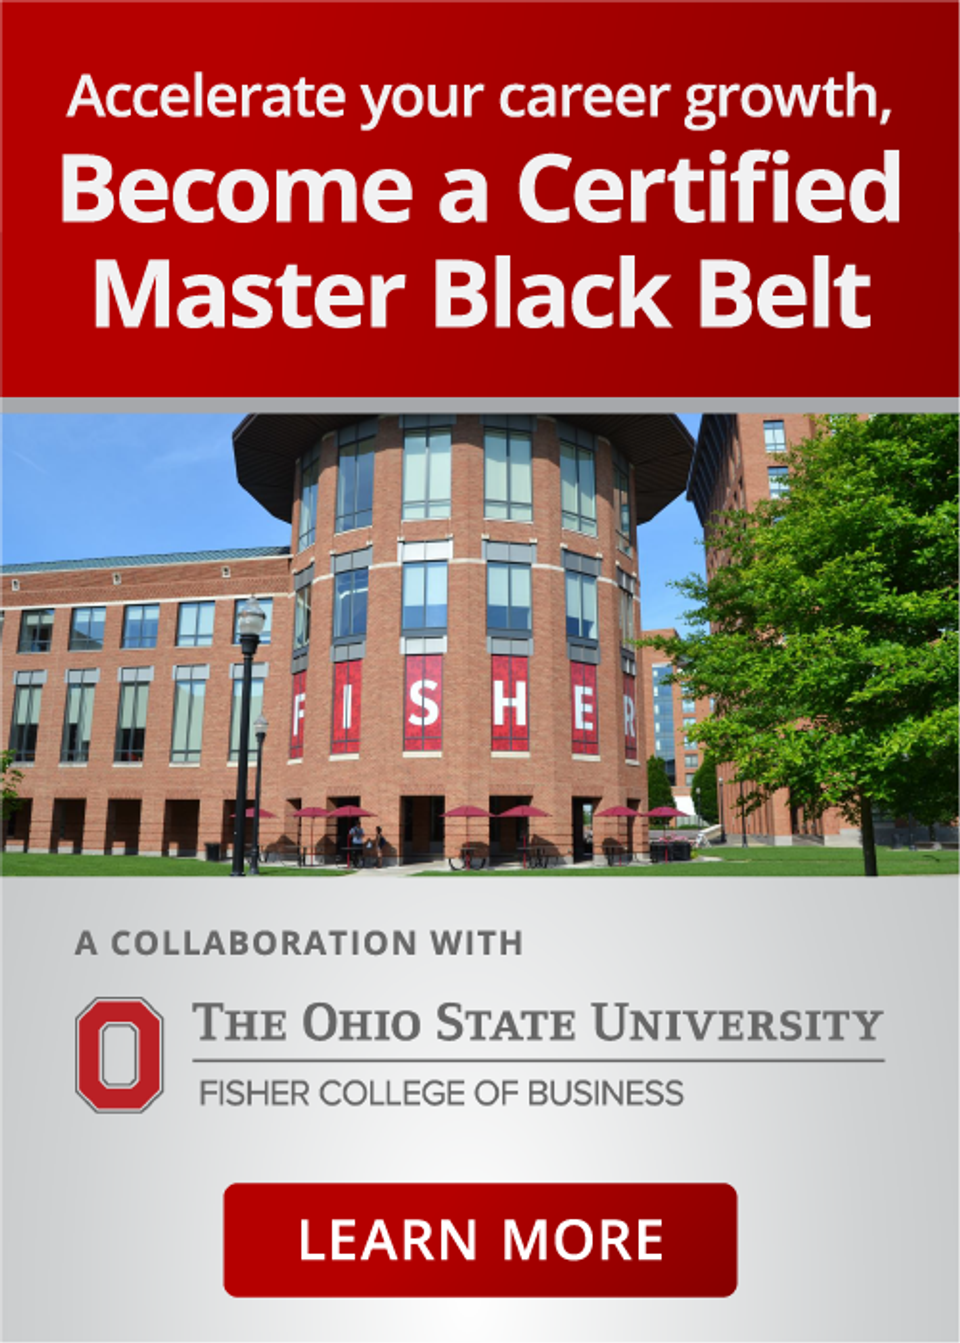 Learn more about the Master Black Belt Program